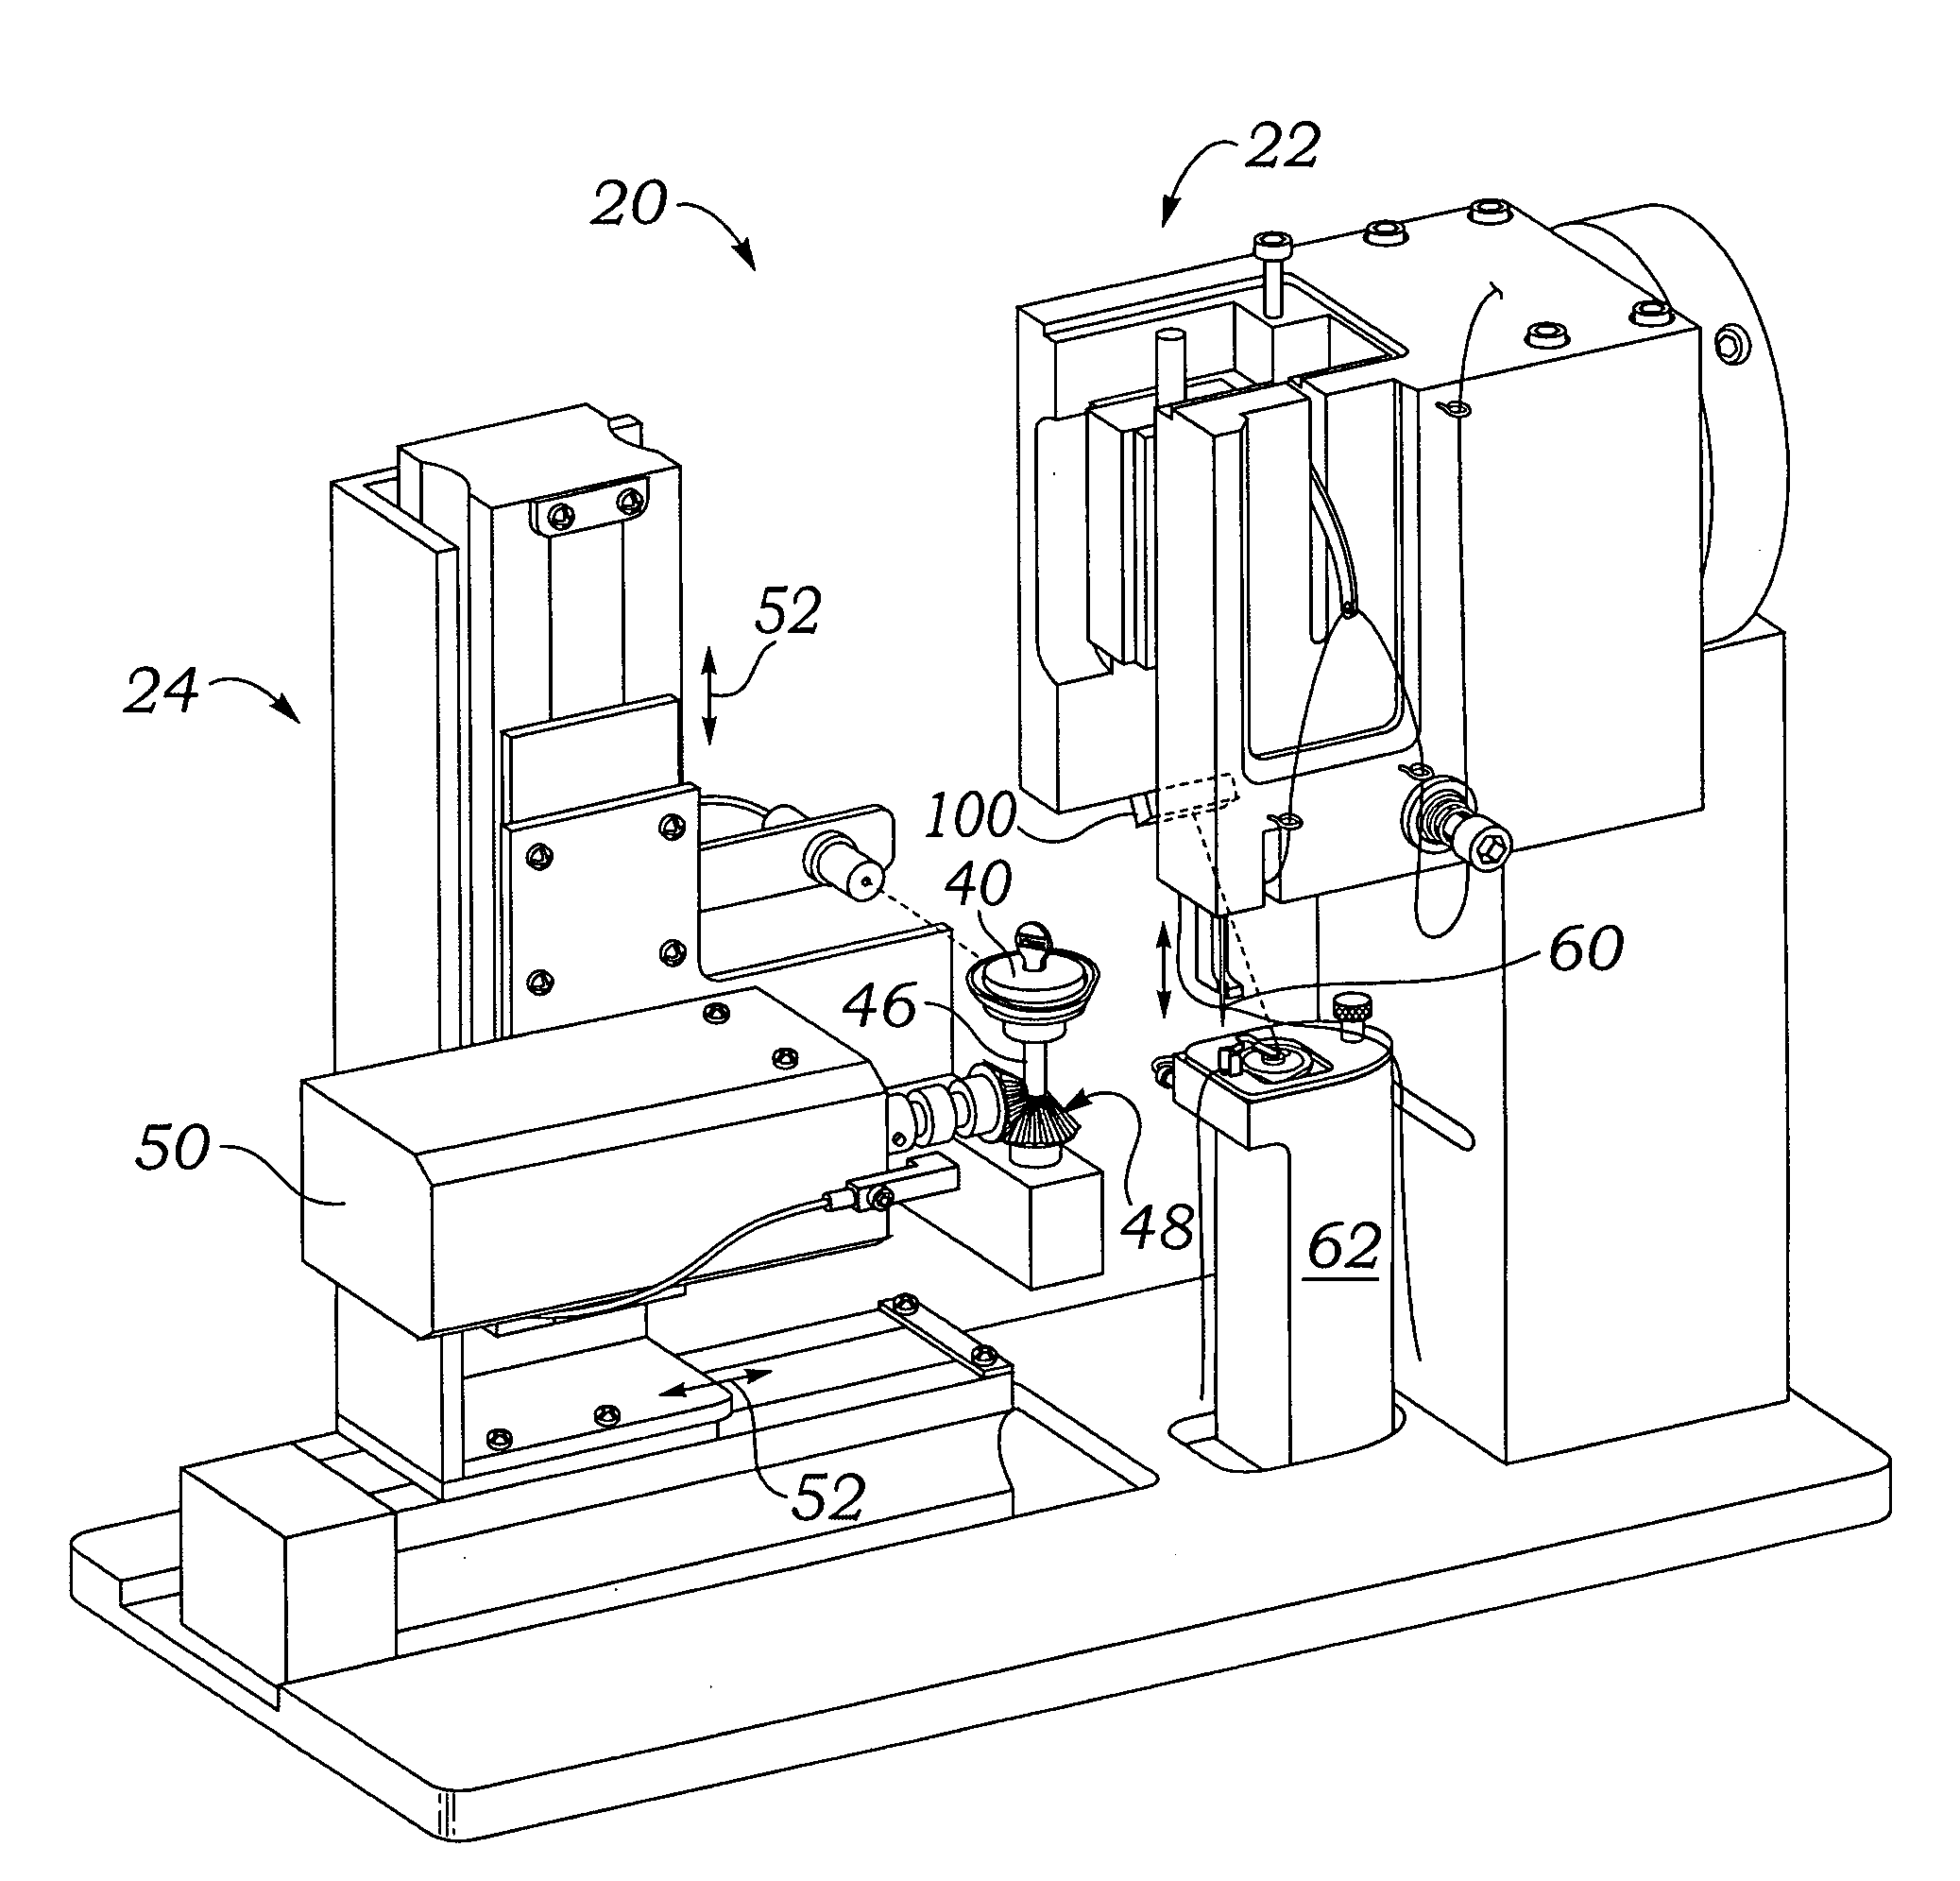 Automated surgical implant sewing system and method